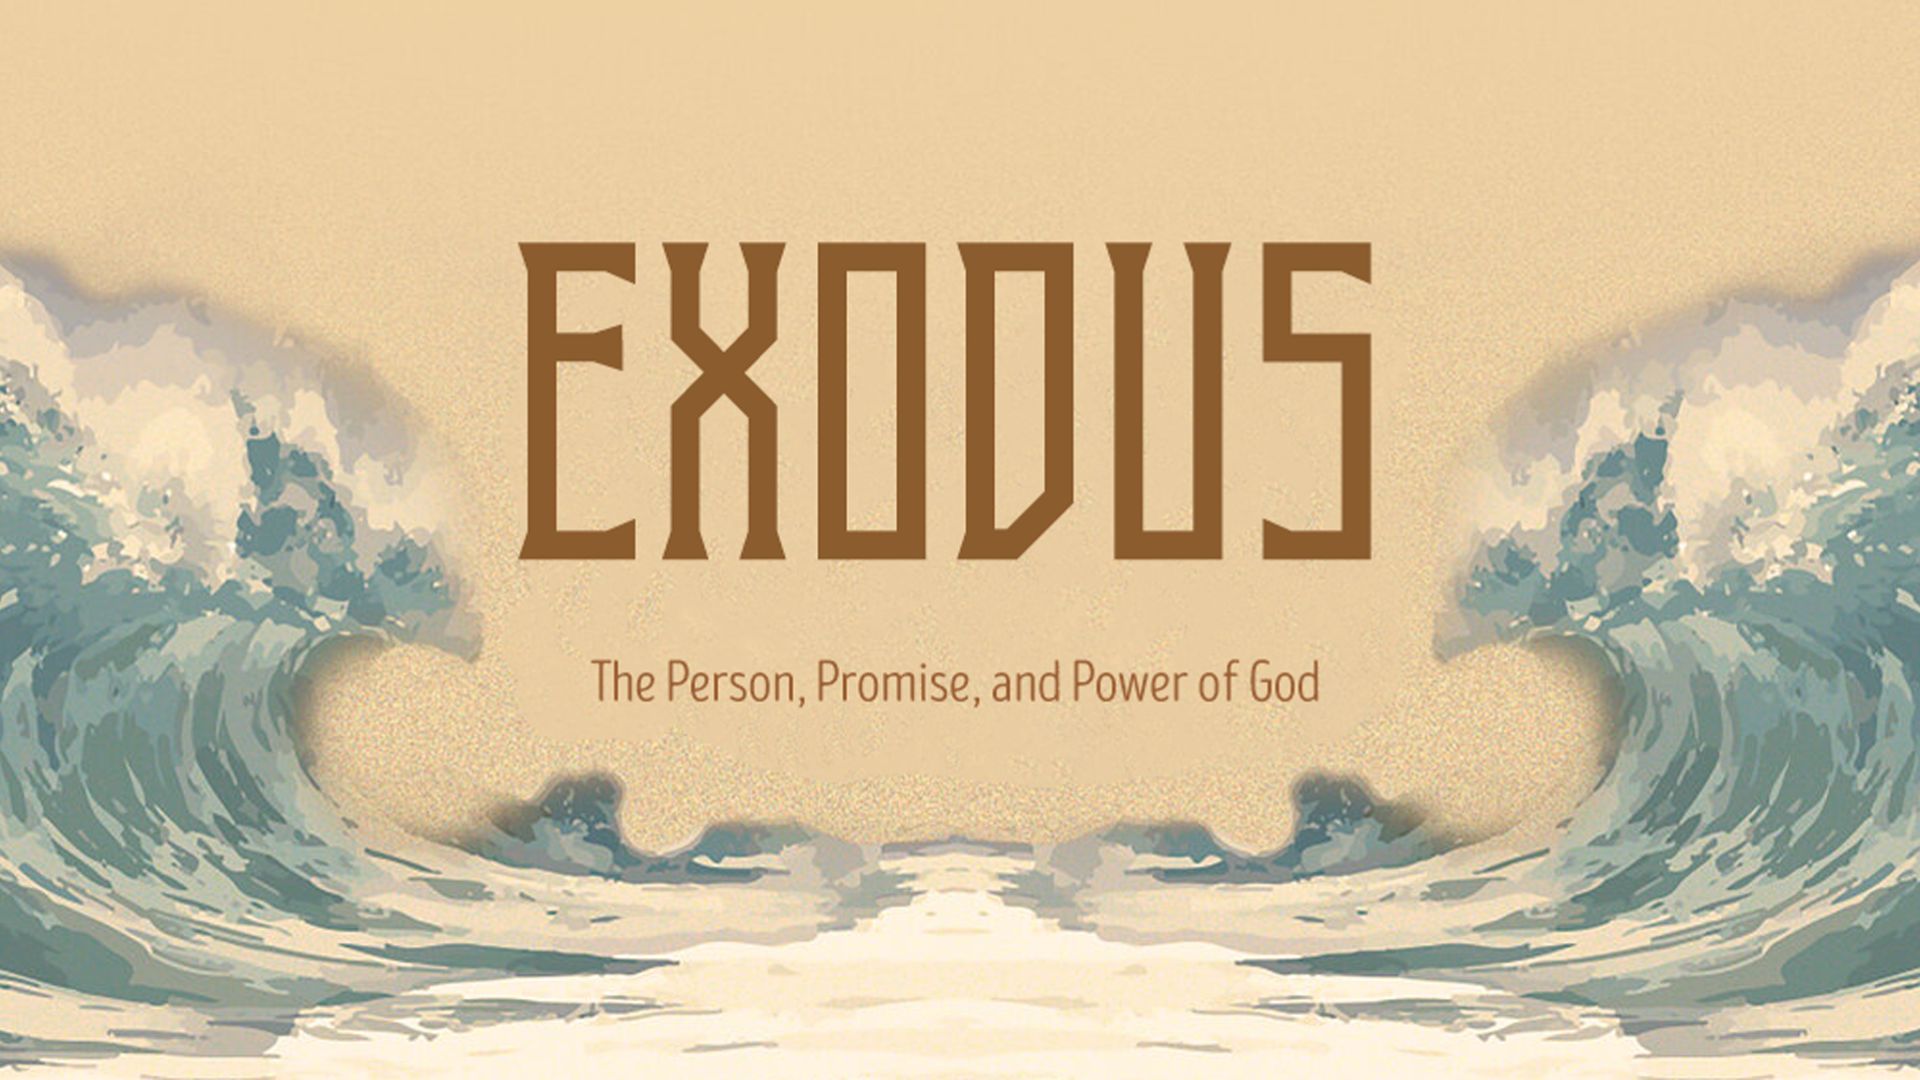 Exodus 20 - The Ten Words of Our Fearful God, Part 2